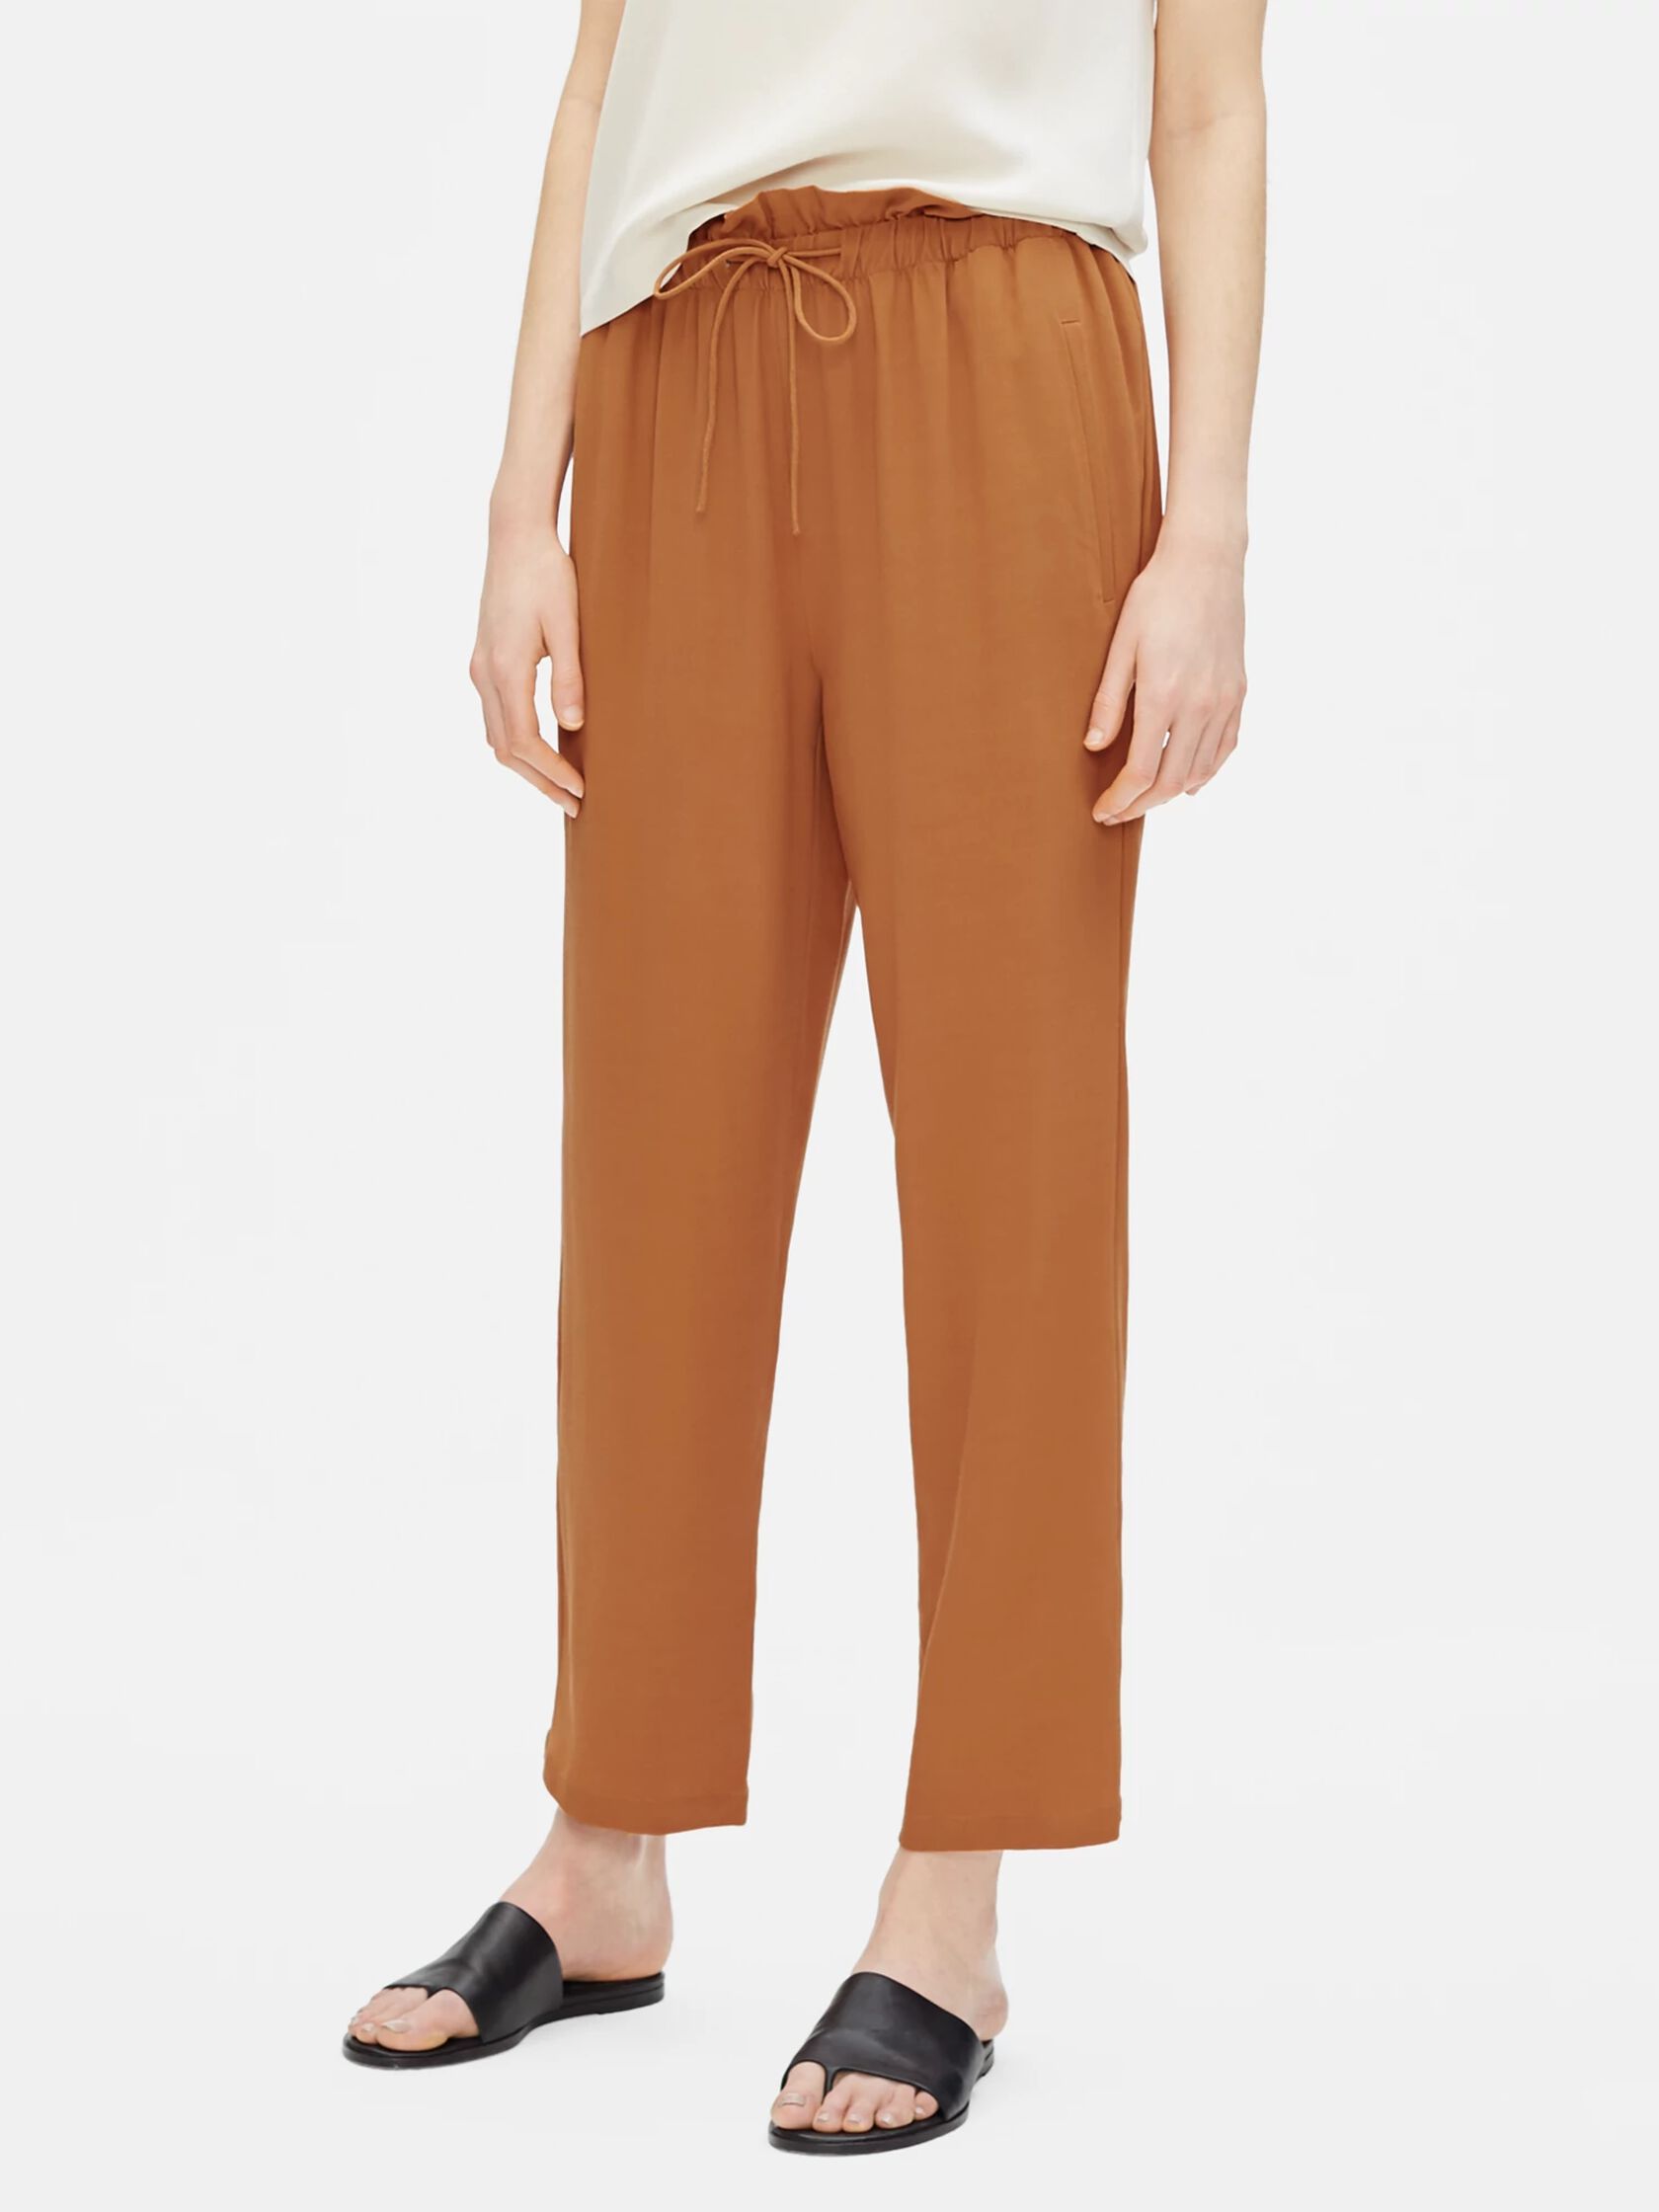 Tencel Viscose Crepe Pant with Gathered Waist | EILEEN FISHER